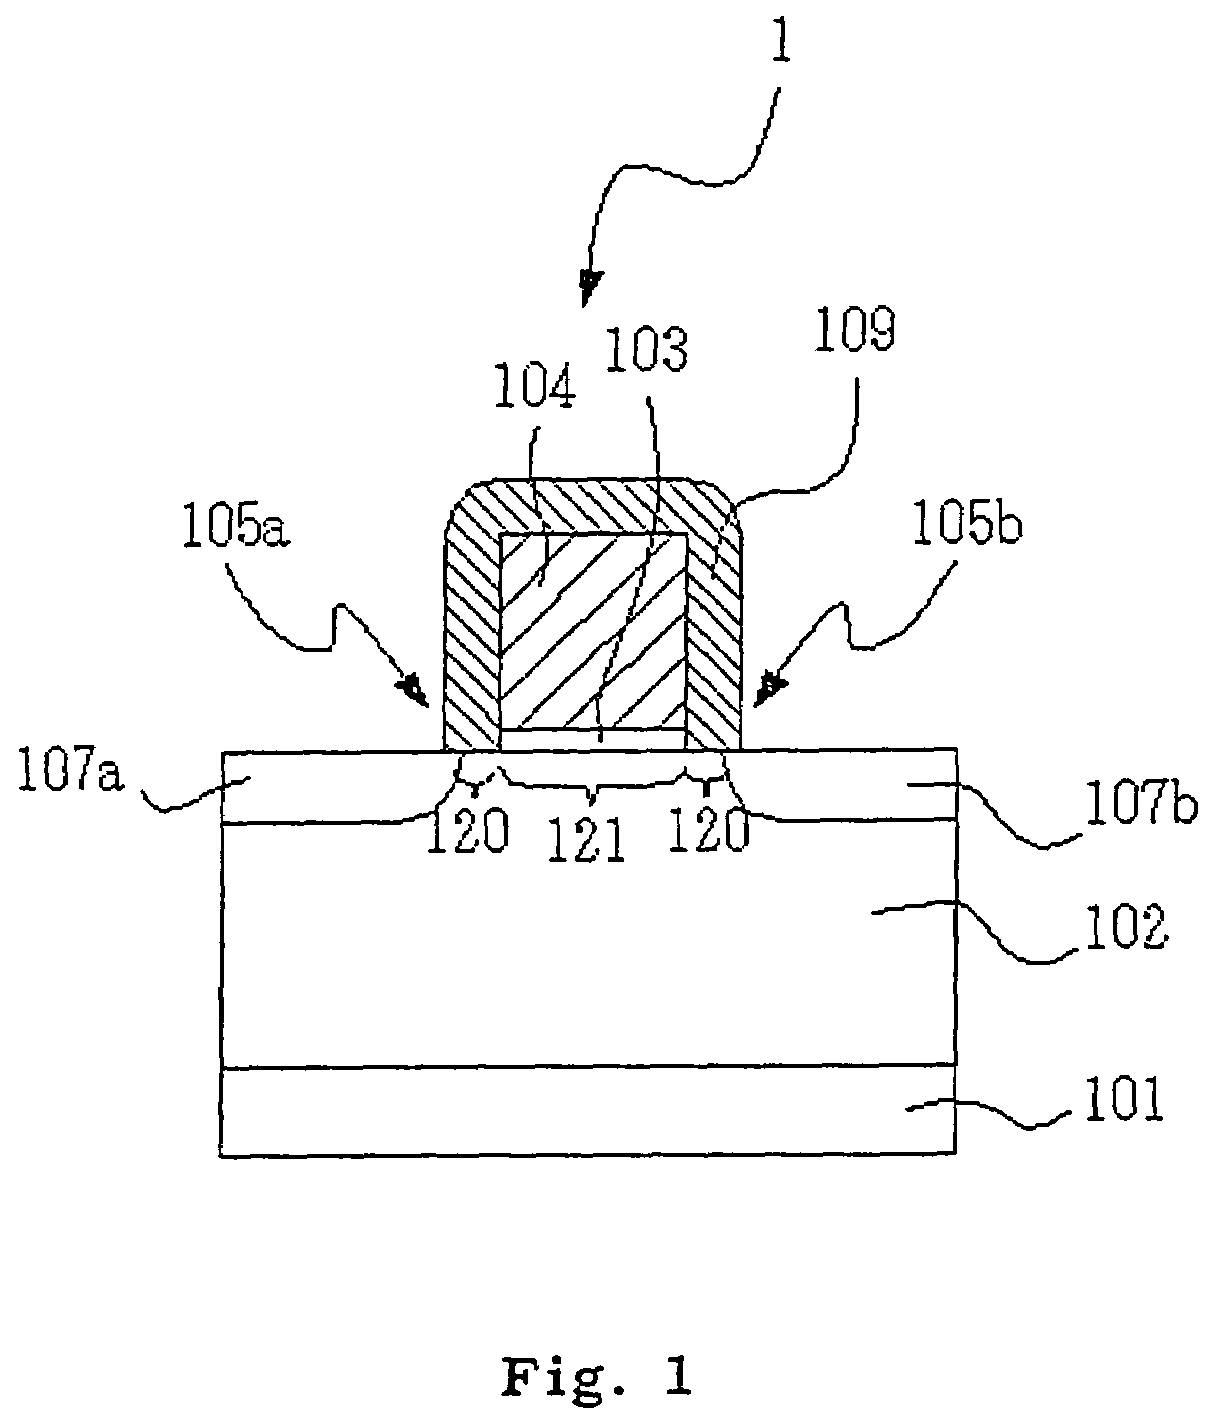 Computer system, memory structure and structure for providing storage of data